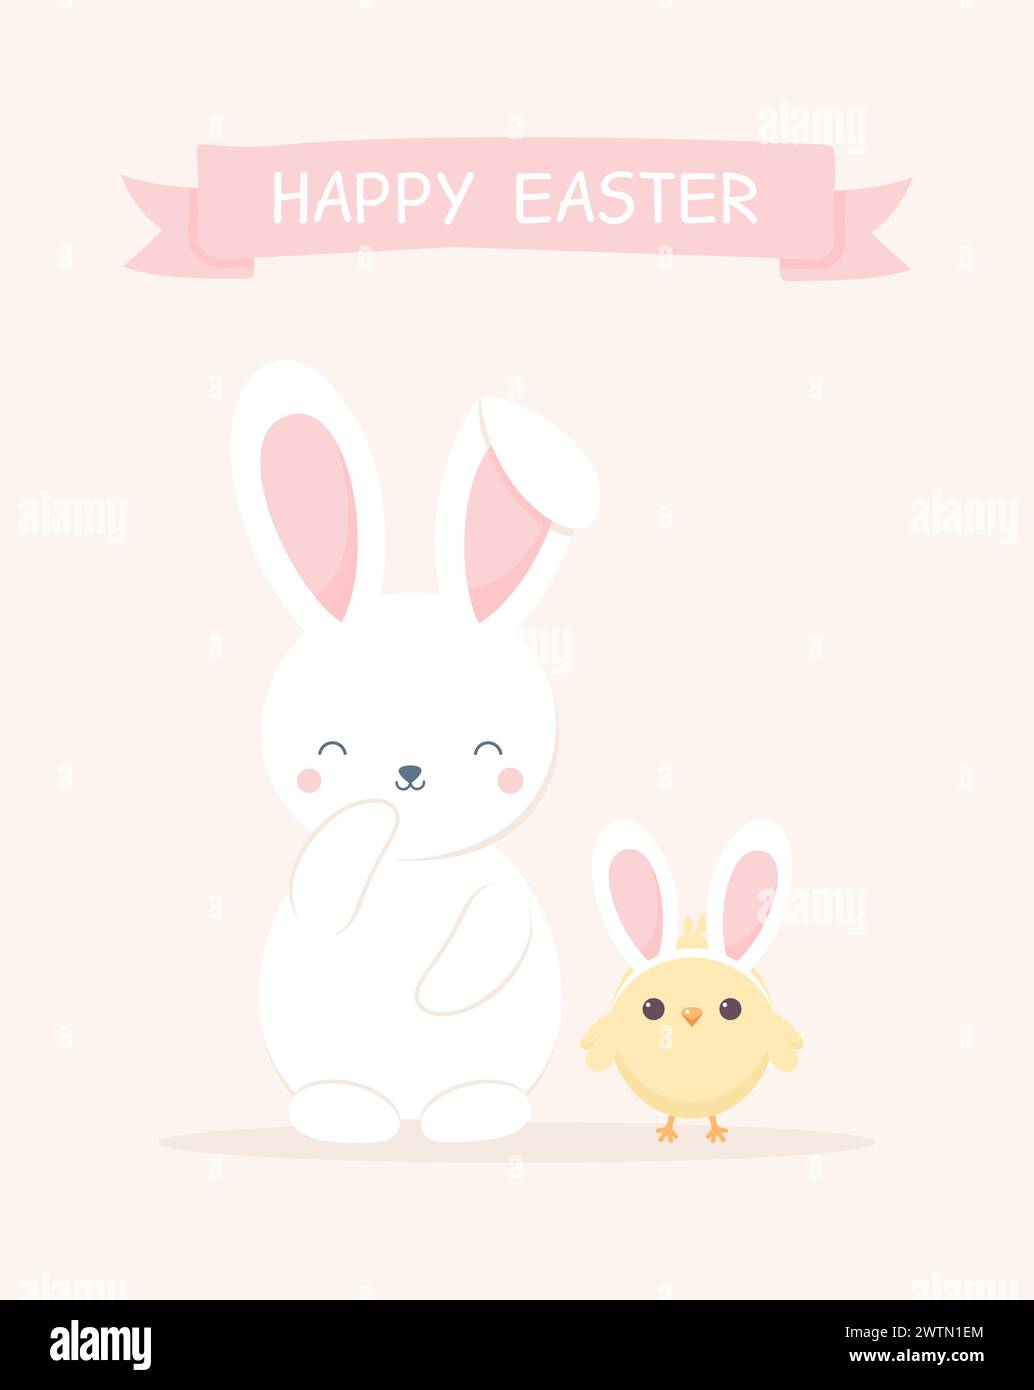 Easter greeting card. Cute laughing bunny and chick wearing bunny ears. Flat vector illustration Stock Vector